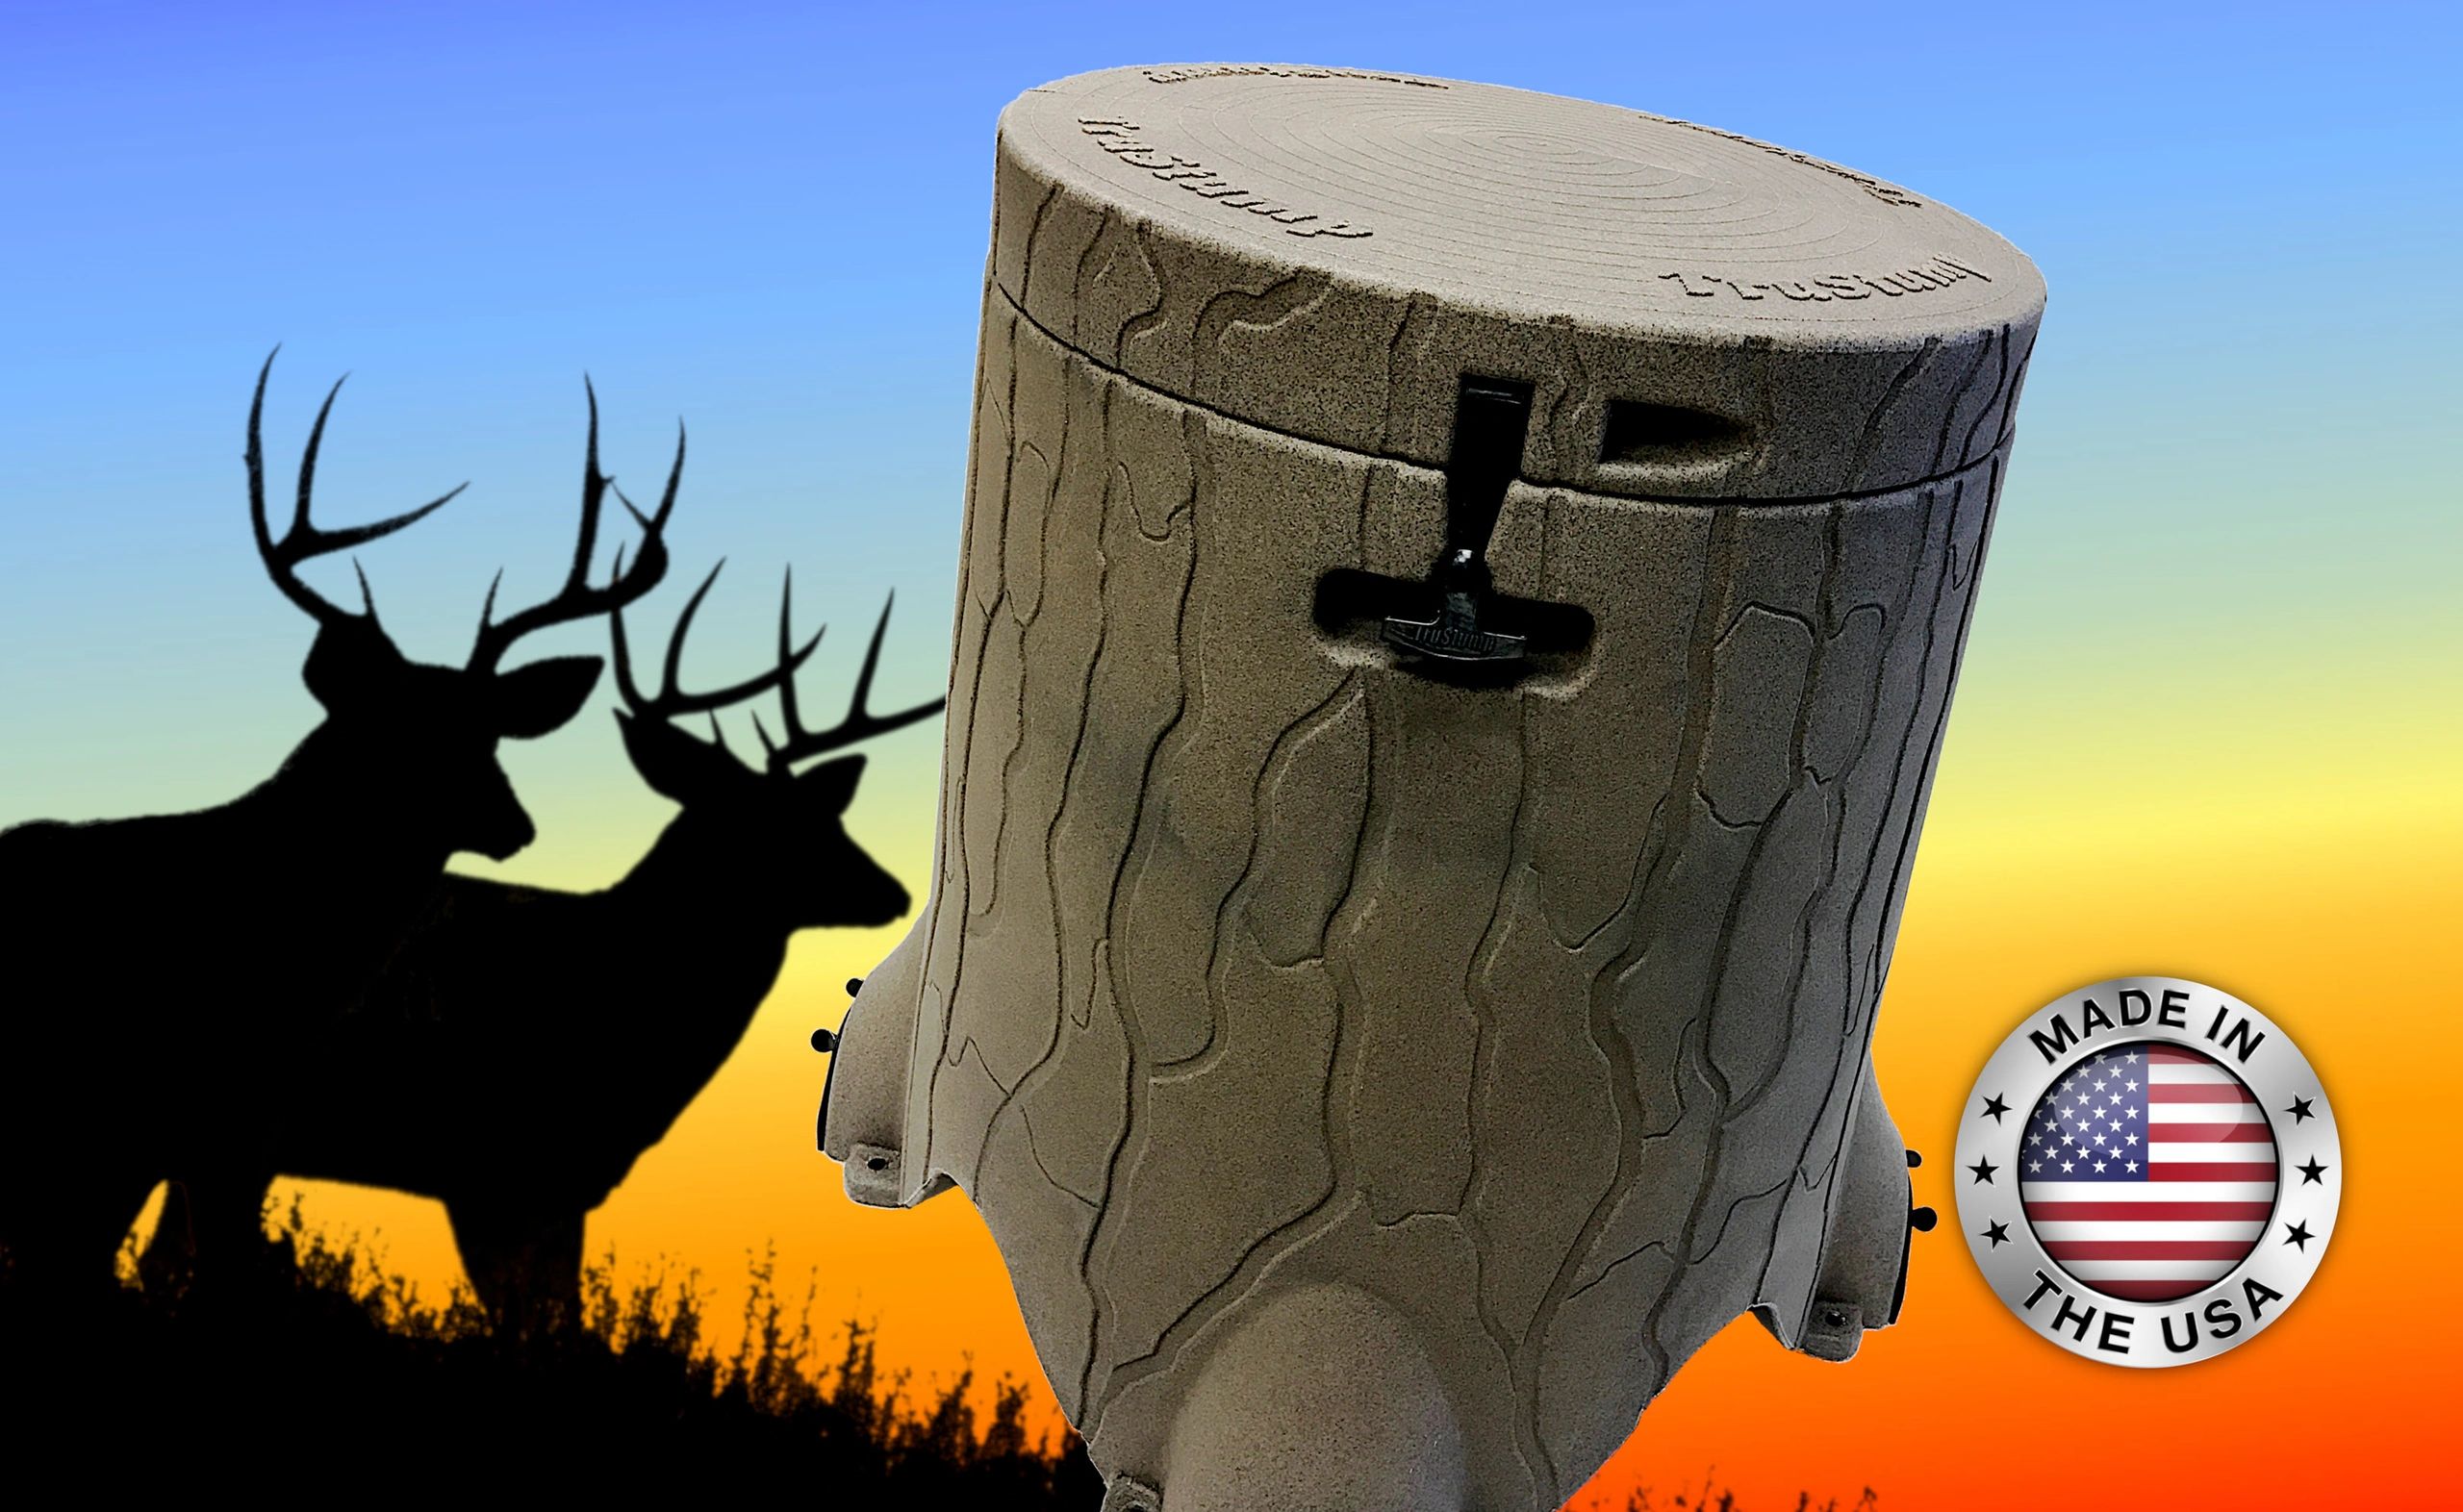 TruStump Gravity Stump Feeder. Keepin' it Real. Based in Stillwater, Oklahoma - Made in the USA.